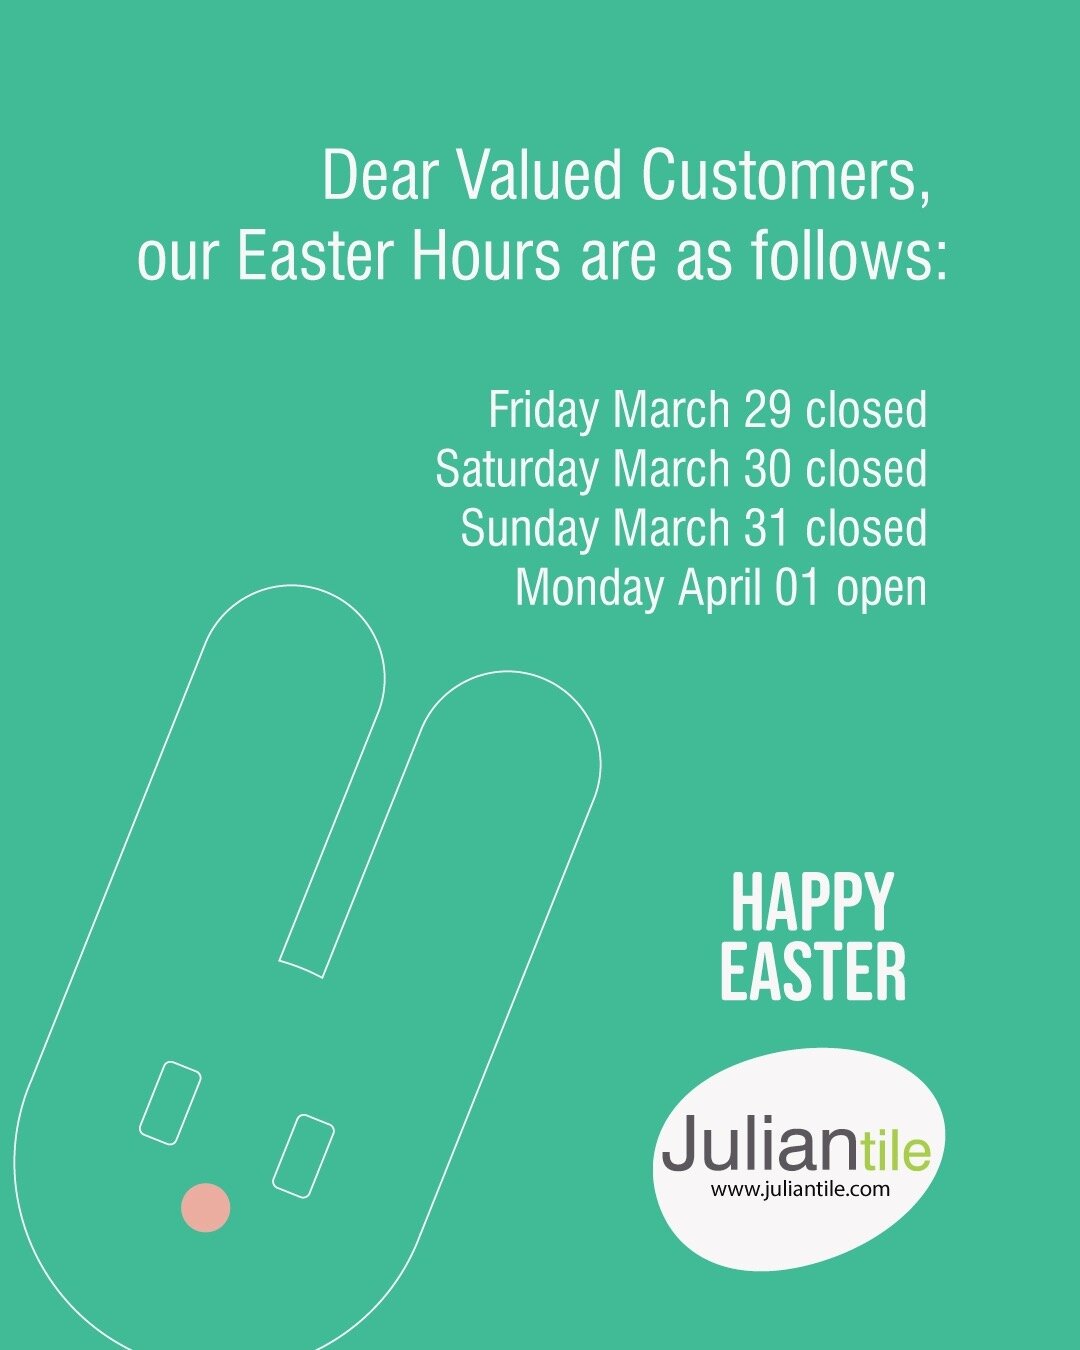 Dear Valued Customers, our Easter Hours are as follows:

Friday March 29 closed
Saturday March 30 closed
Sunday March 31 closed
Monday April 01 open

Happy Easter!